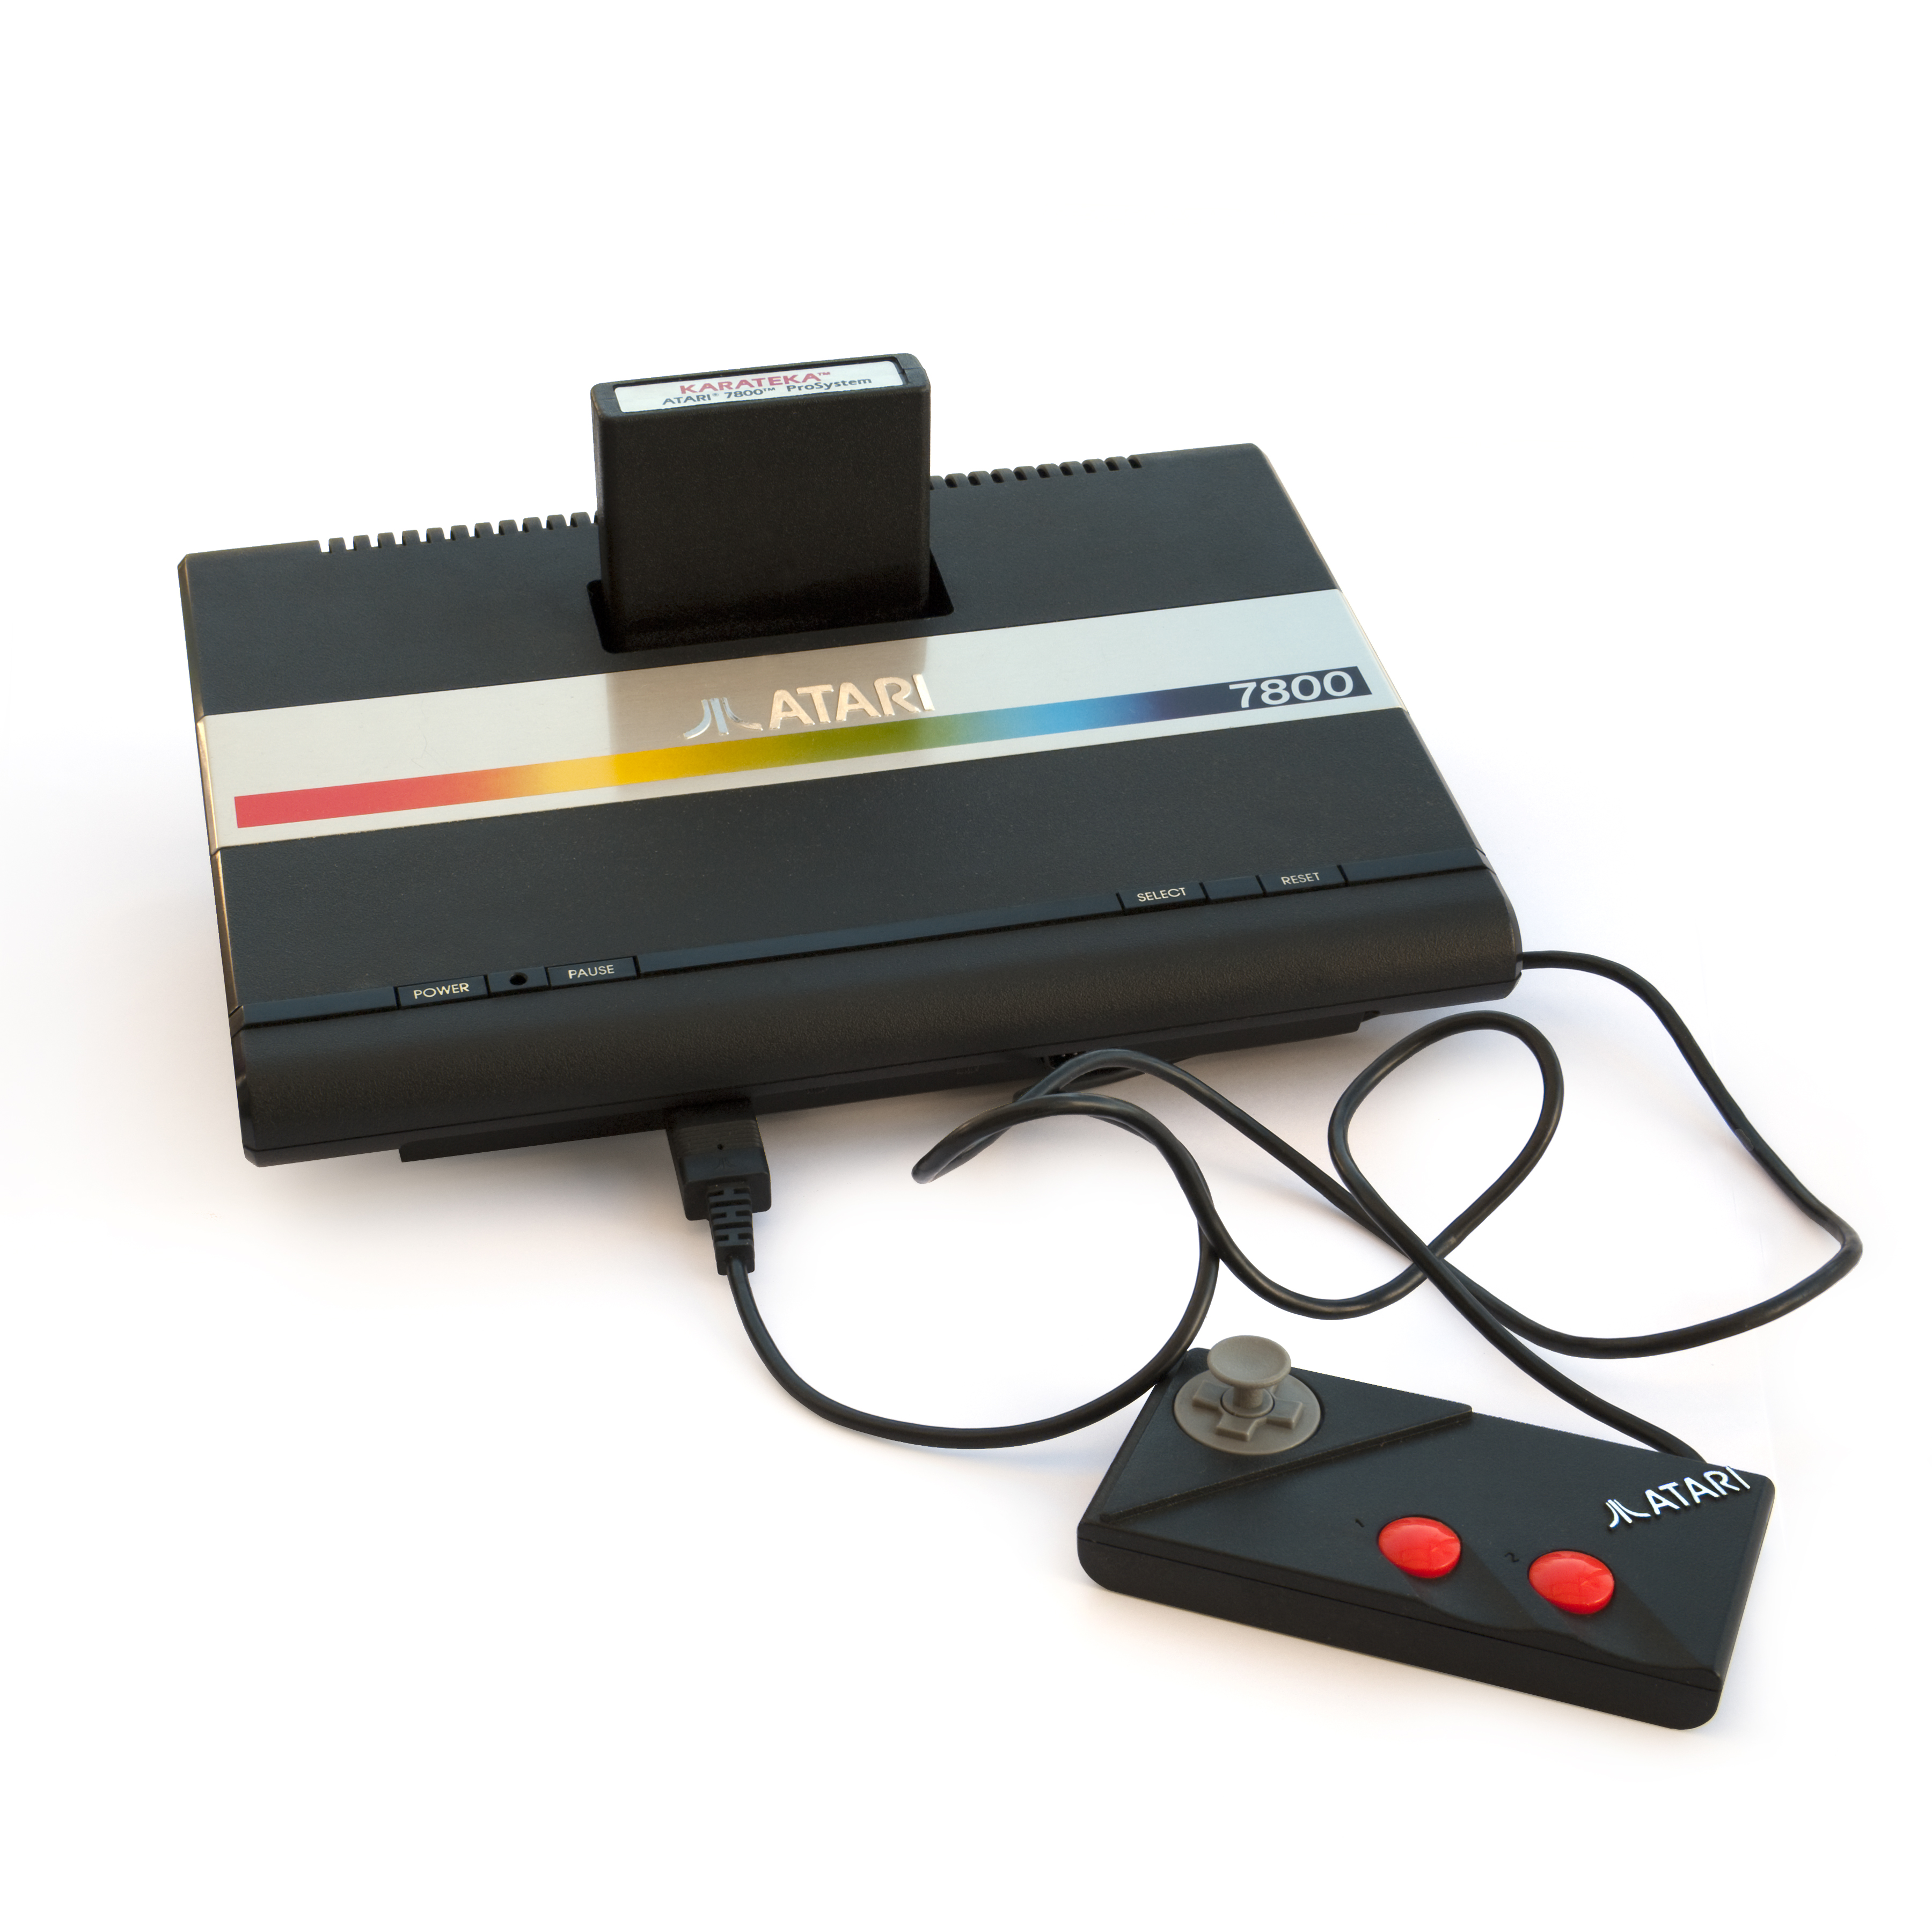 http://upload.wikimedia.org/wikipedia/commons/8/86/Atari_7800_with_cartridge_and_controller.jpg